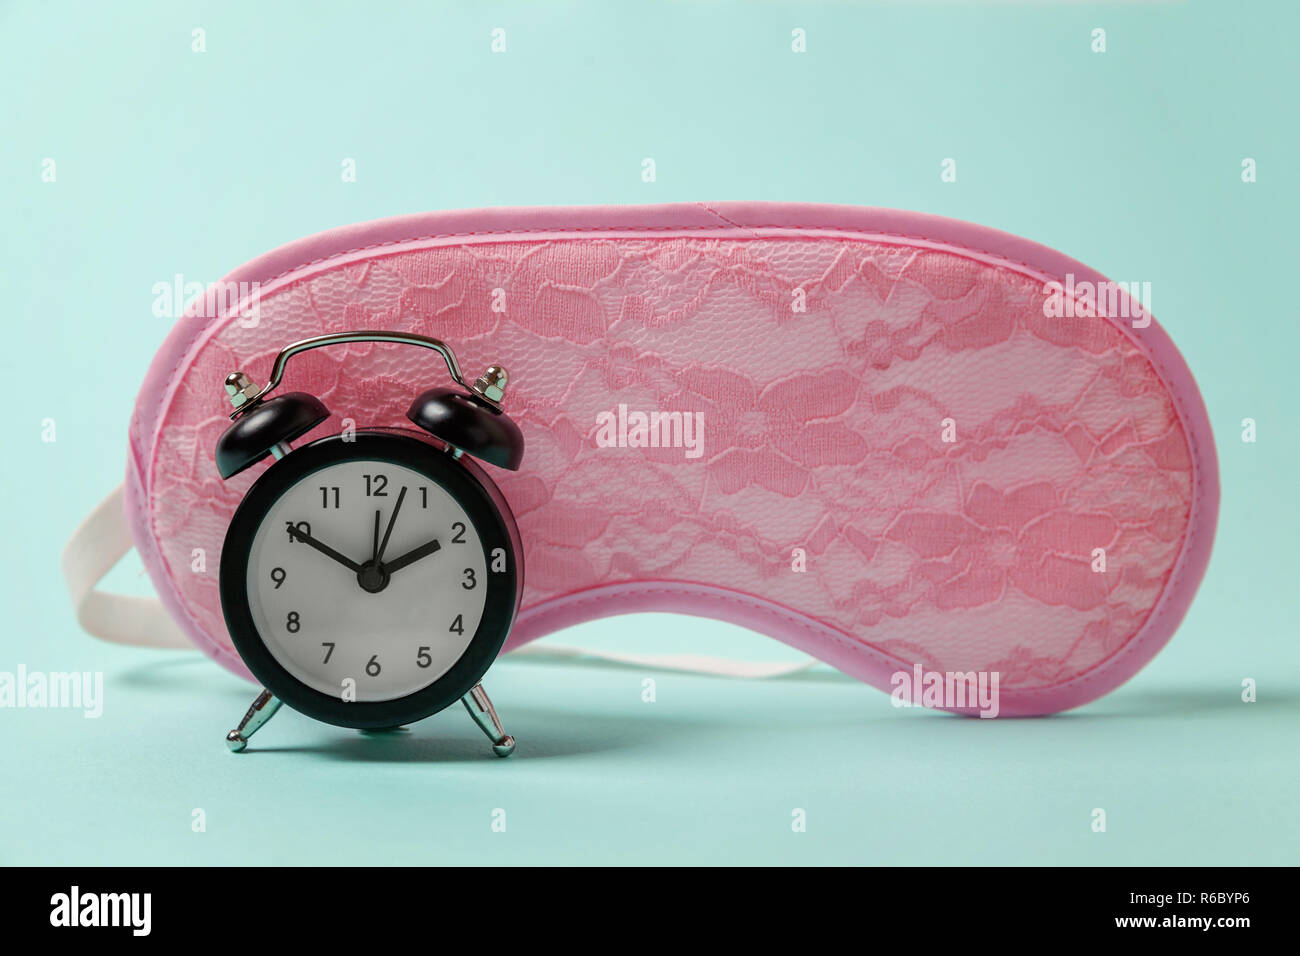 Sleeping eye mask, alarm clock isolated on blue pastel colourful trendy background. Do not disturb me, let me sleep. Rest, good night, siesta, insomnia, relaxation, tired, travel concept Stock Photo